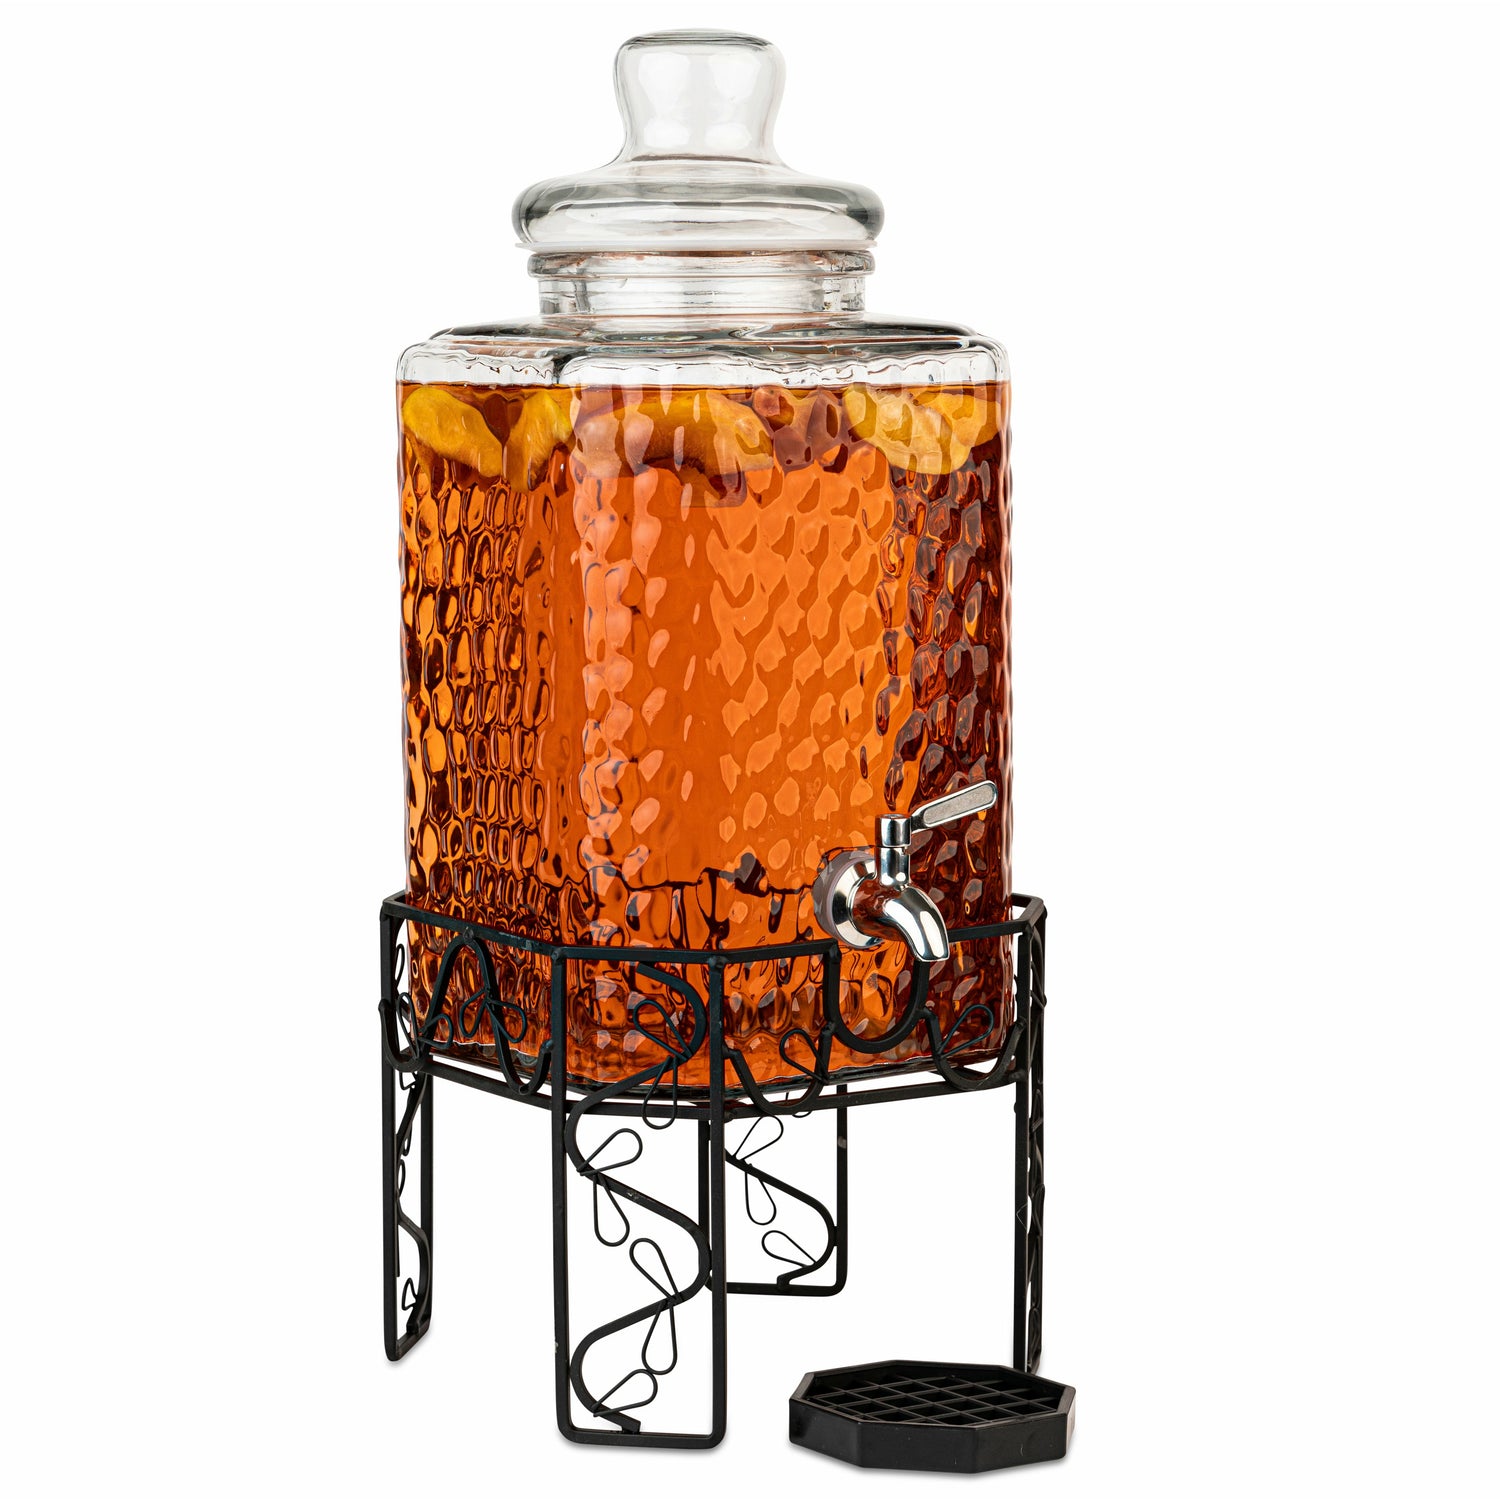 BEVERAGE DISPENSER (GLASS 2.5 GAL) - Sully's Tool & Party Rental